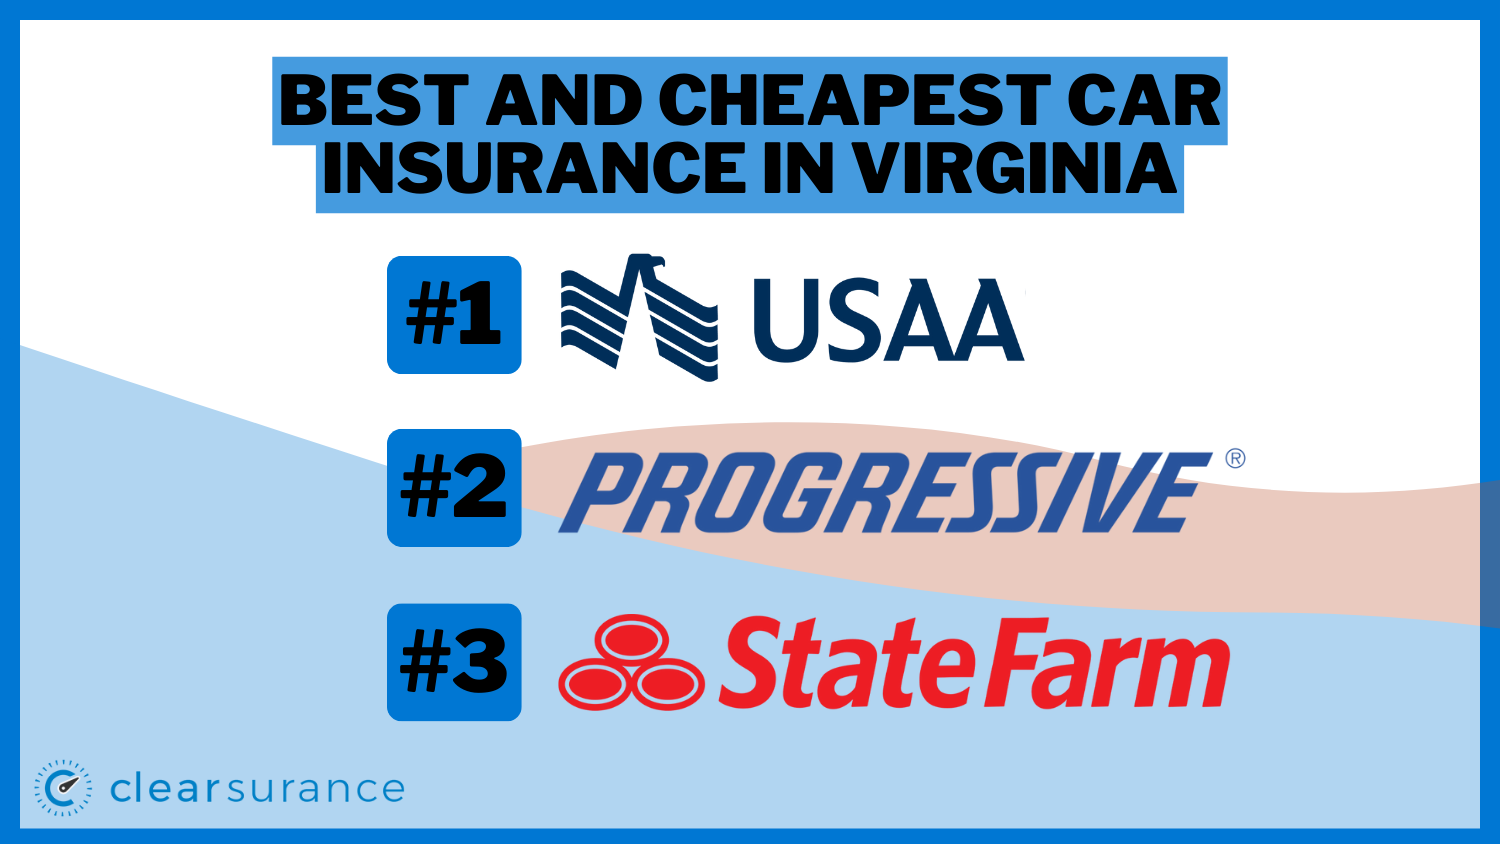 Best and Cheapest Car Insurance in Virginia